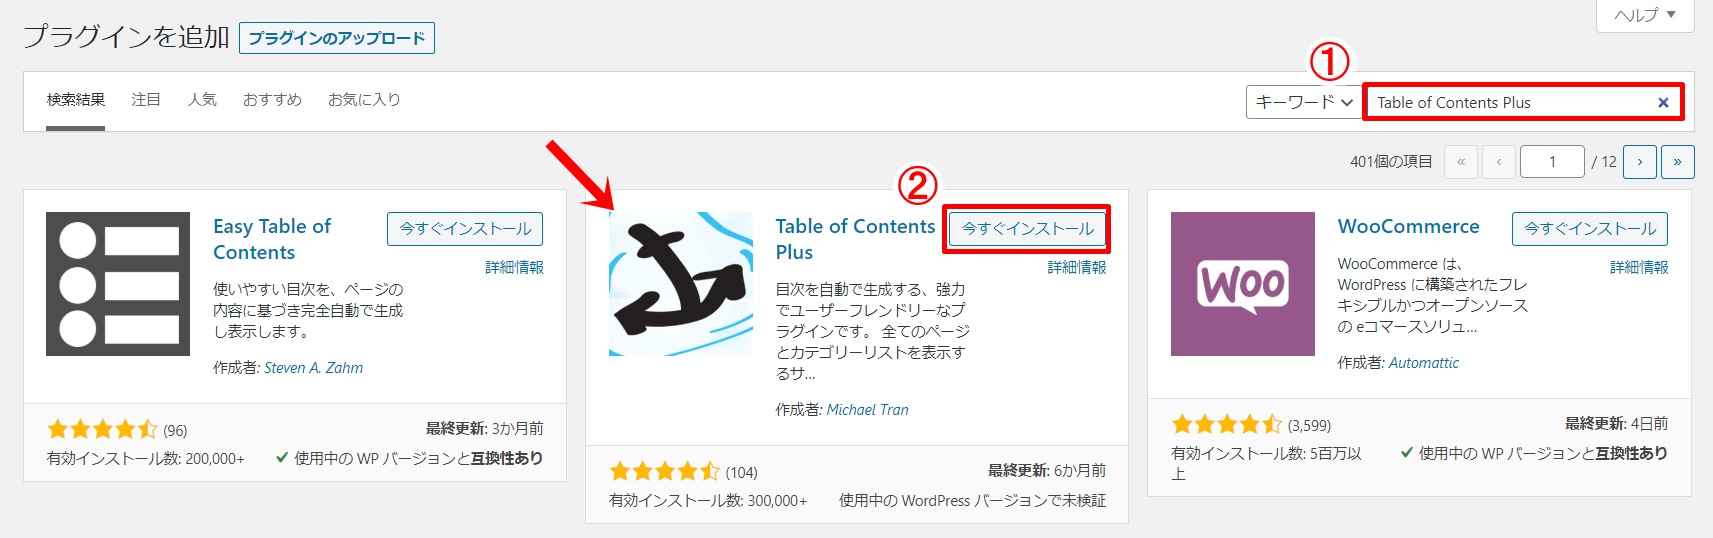 Table of Contents Plusの設定方法2